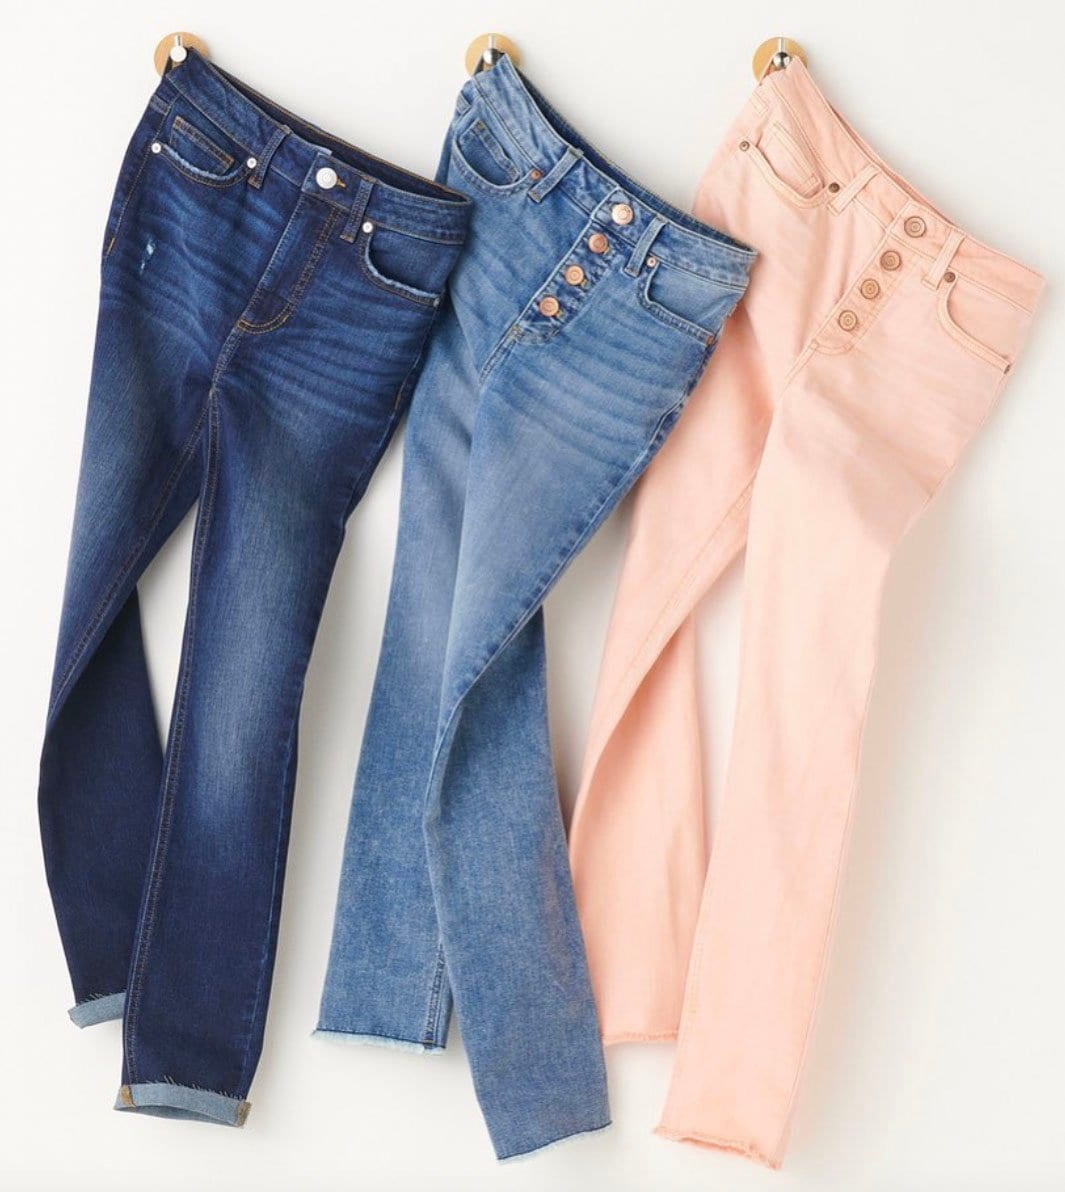 How Lauren Conrad's Affordable LC Jeans Became Popular